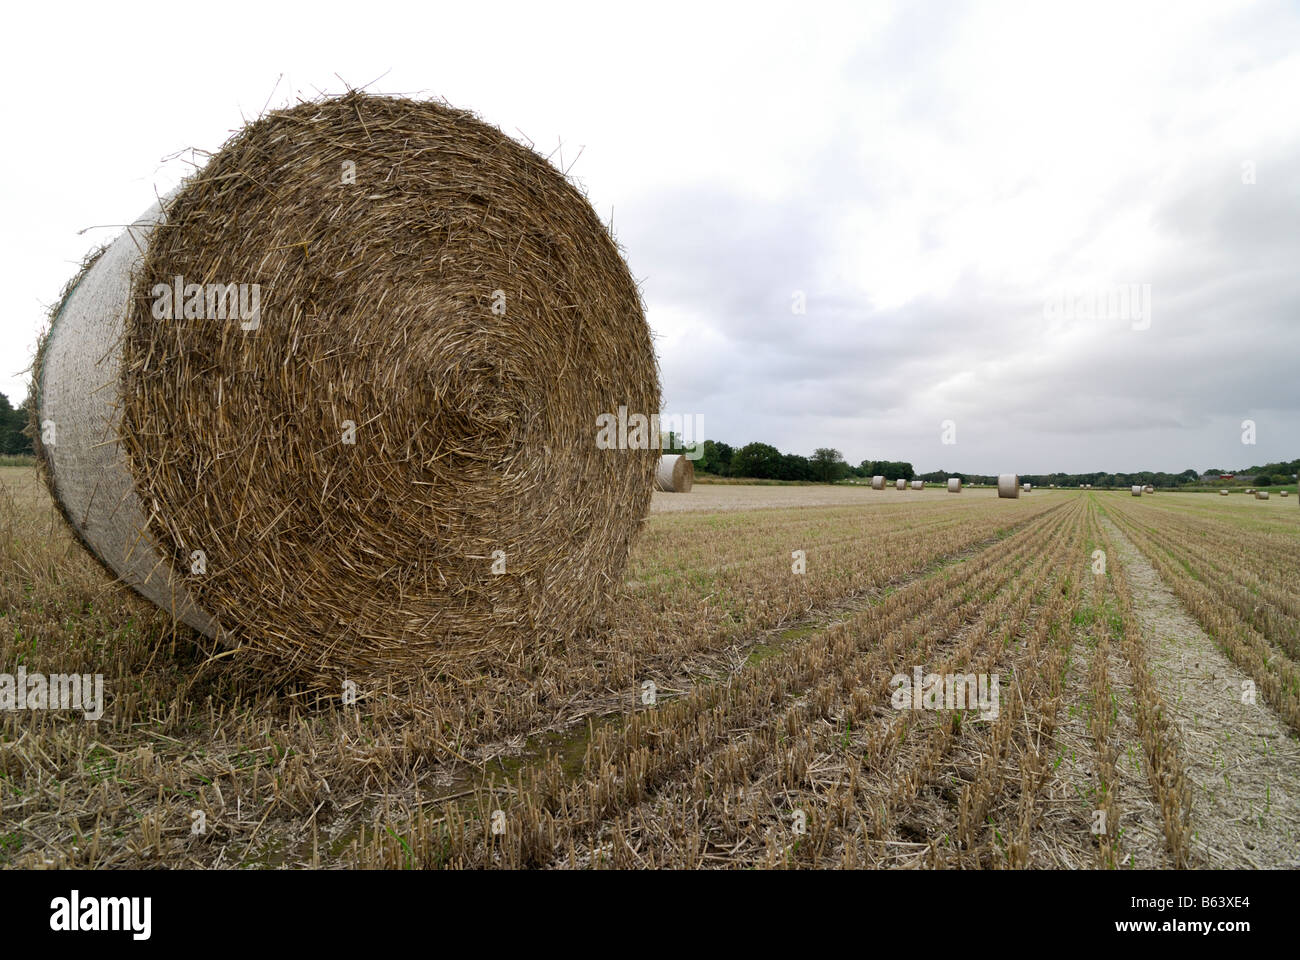 The drums of hay Autumn Sweden Stock Photo